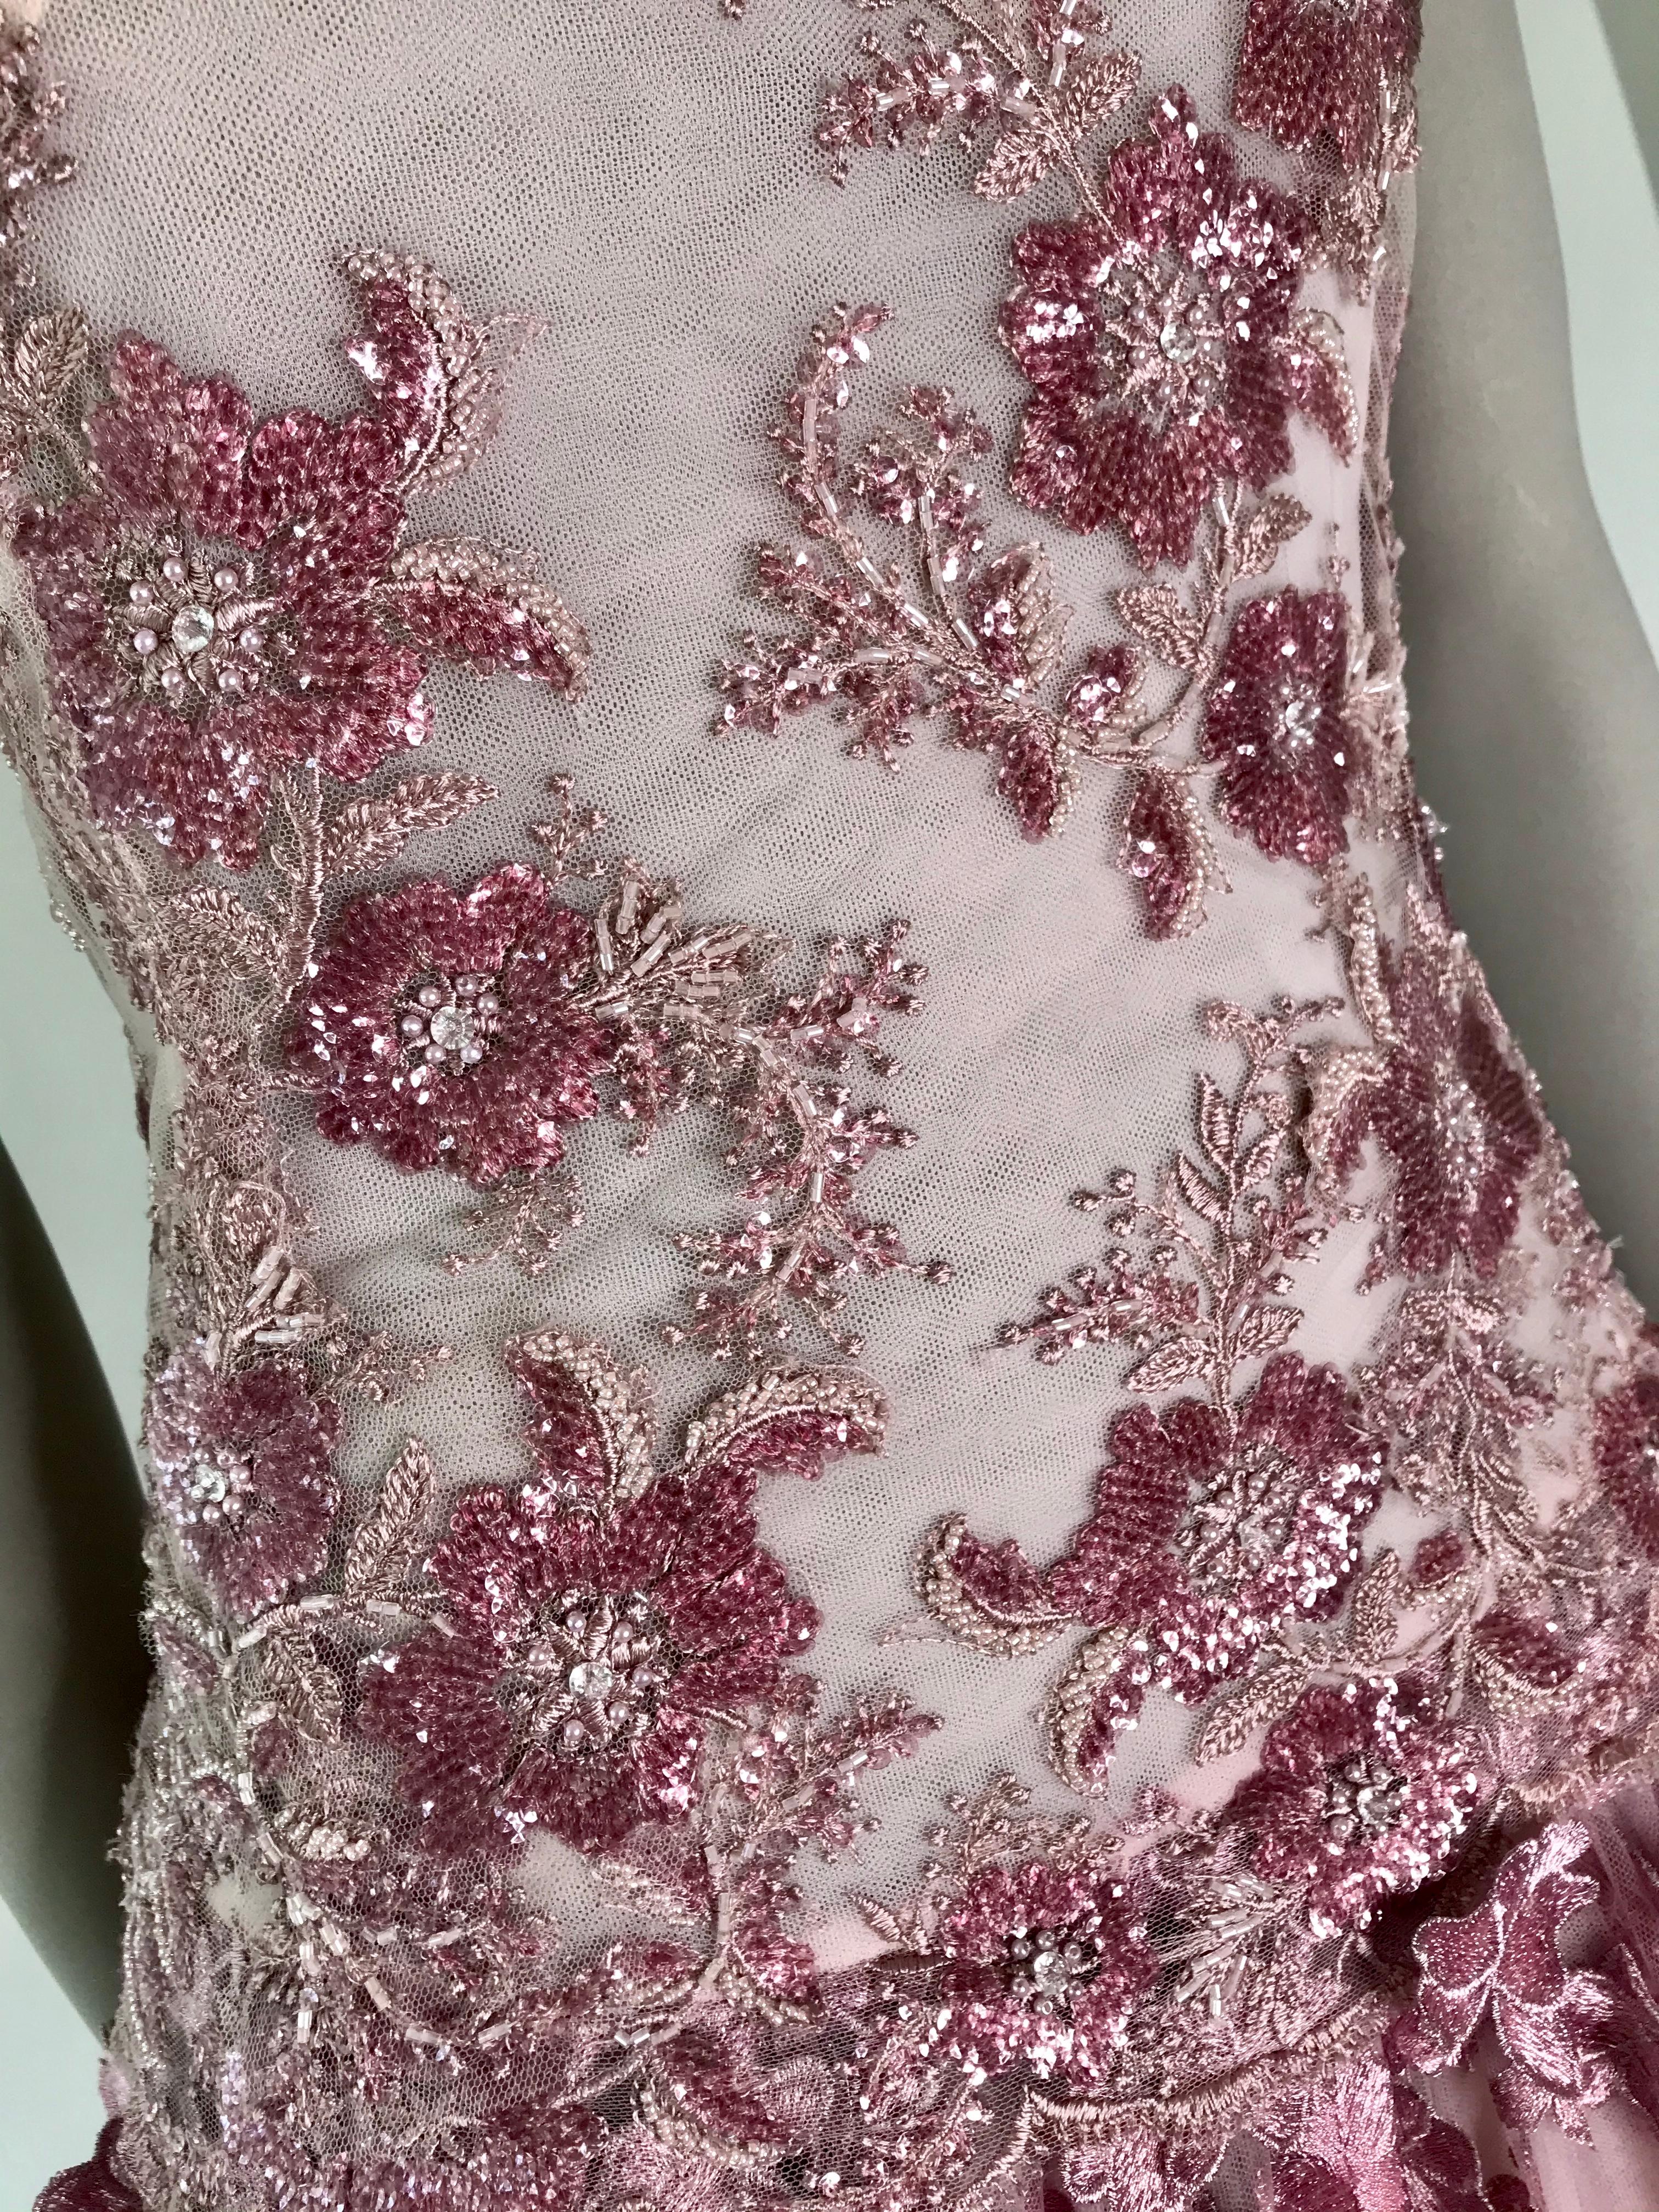 Pelush Pink Tulle Dress Gown With Three Dimensional Flowers And Embroidery - S In New Condition For Sale In Greenwich, CT